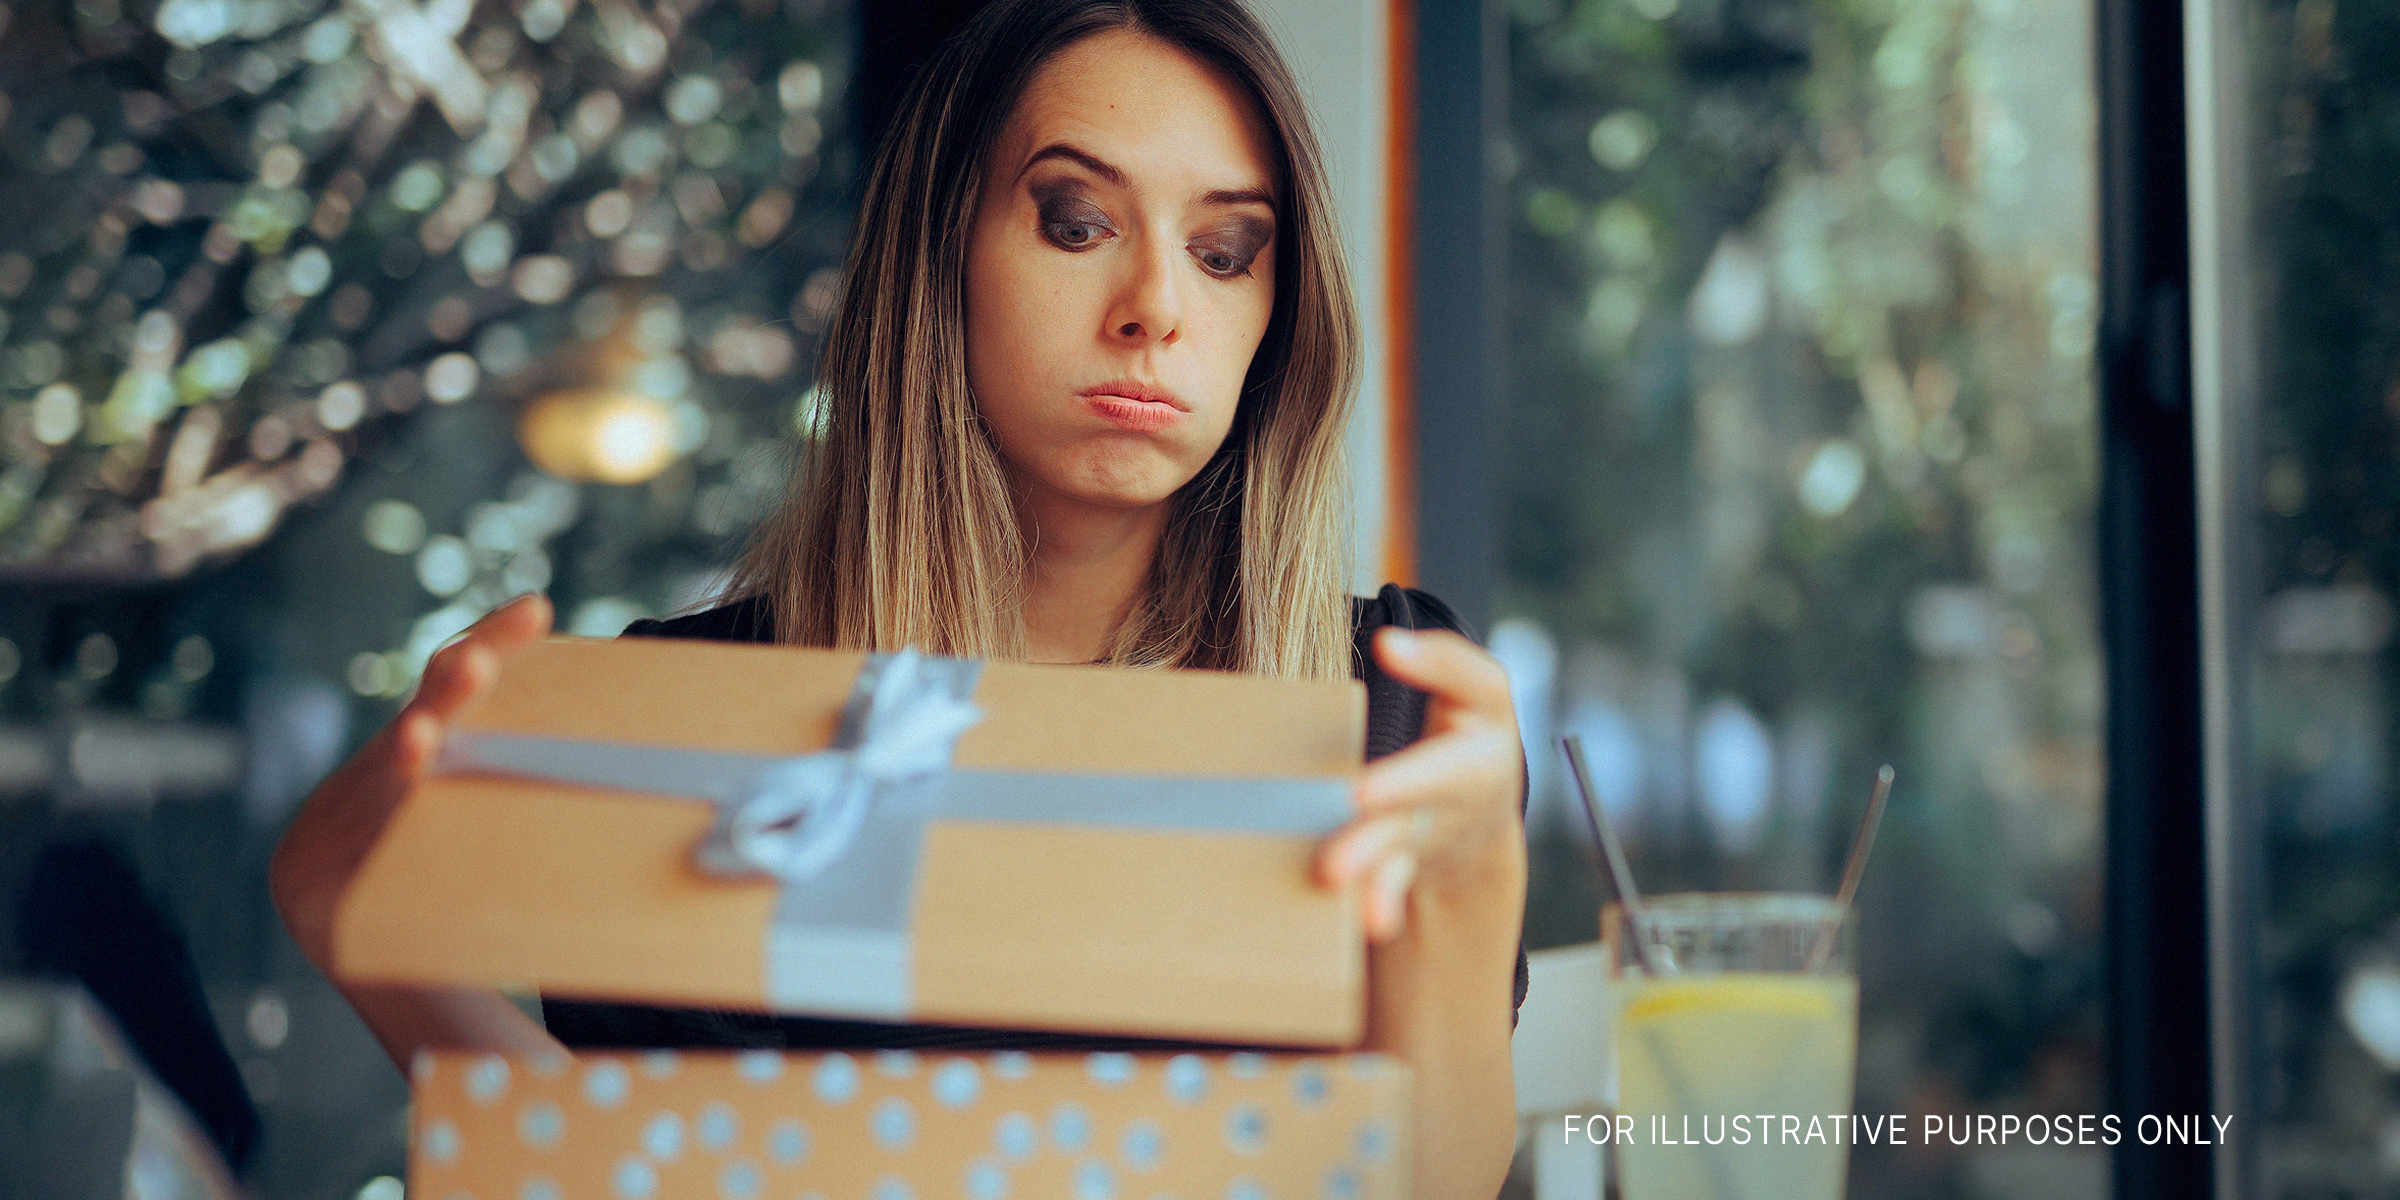 A skeptical woman opening a gift | Source: Shutterstock